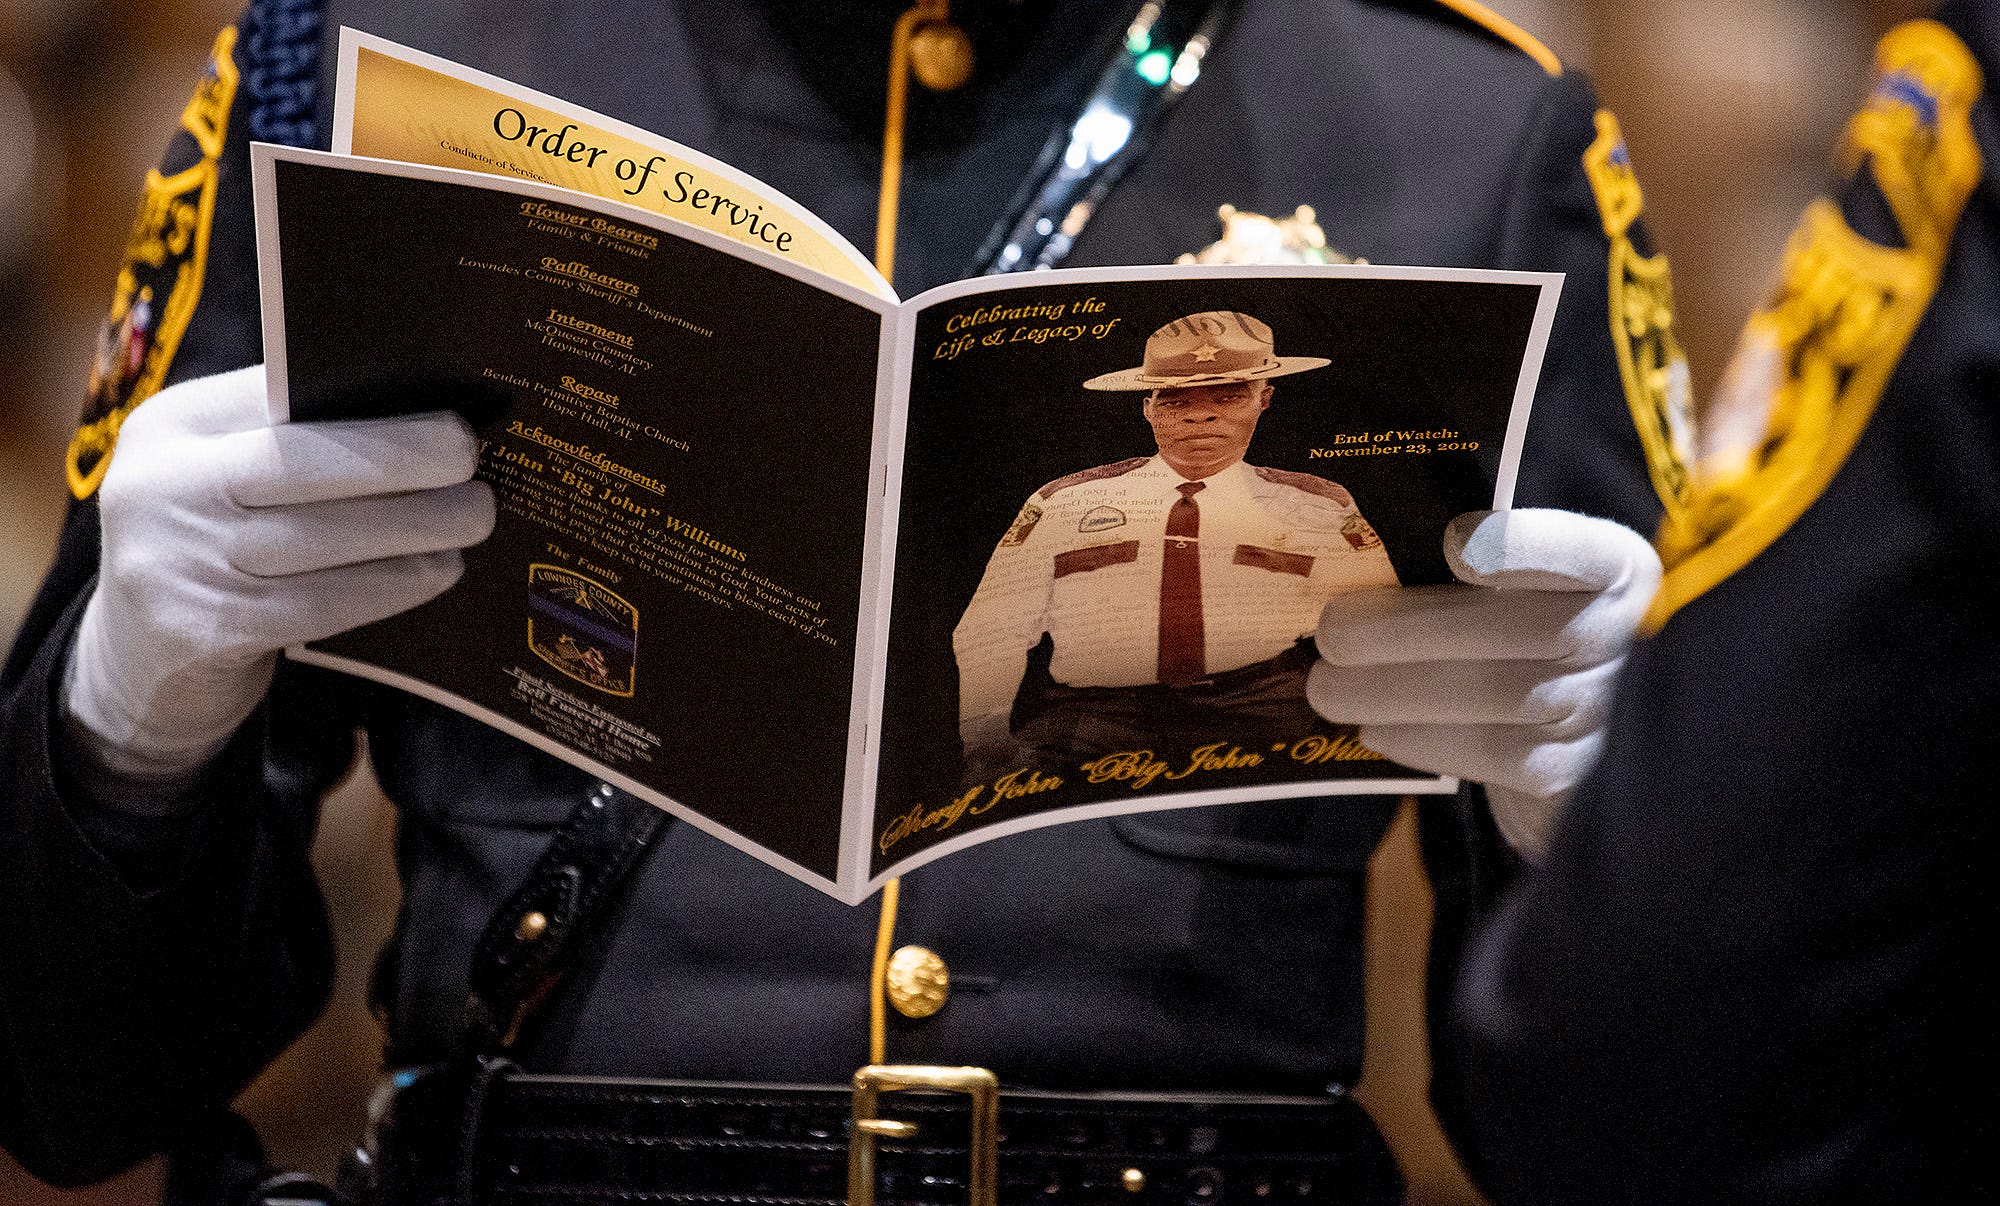 PHOTO: An attendee reads a program during the funeral of Lowndes County Sheriff "Big John" Williams at Garrett Coliseum in Montgomery, Ala., Dec. 2, 2019.